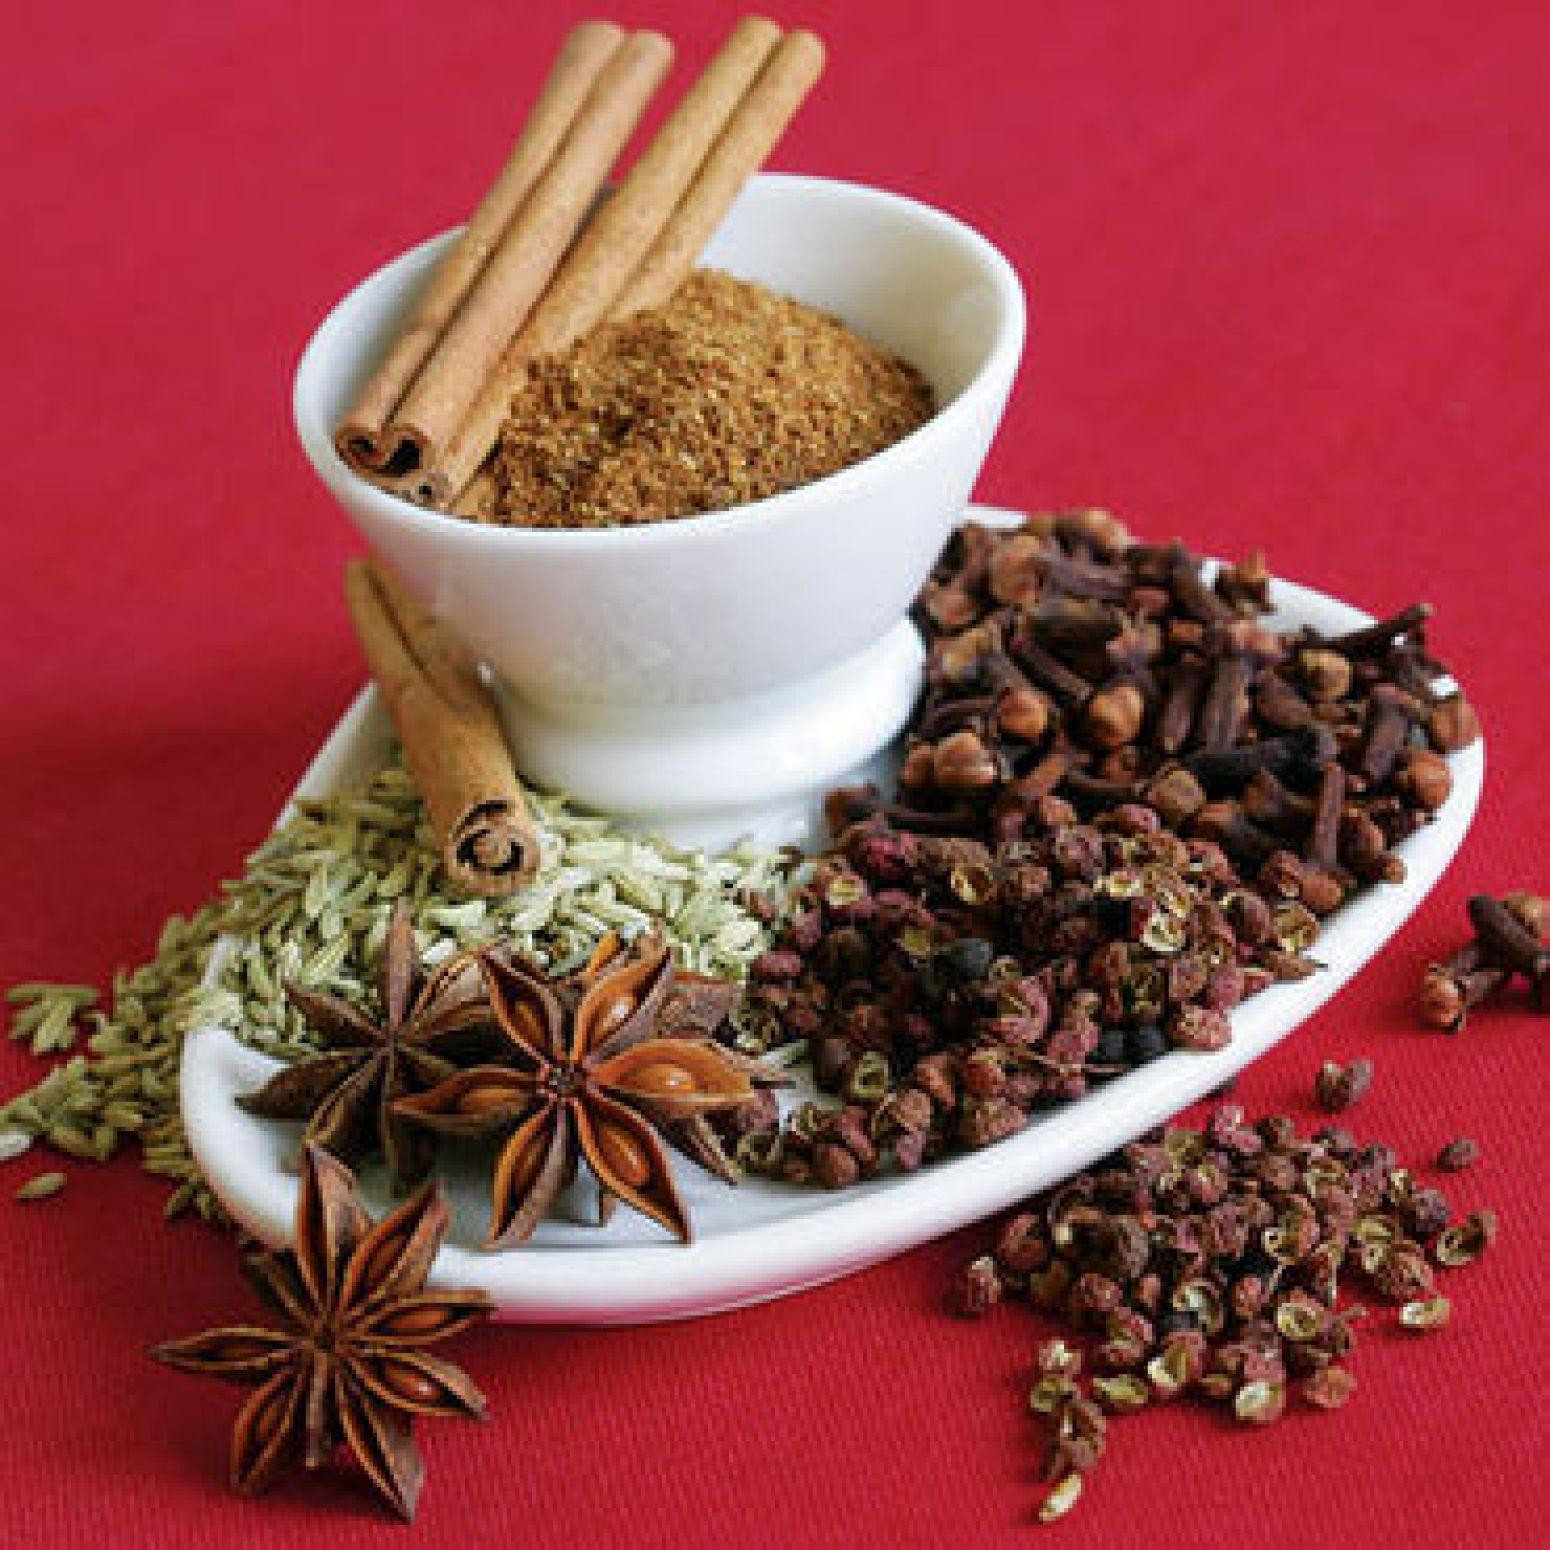 Recipes Using Chinese Five Spice
 Chinese 5 Spice Powder Recipe